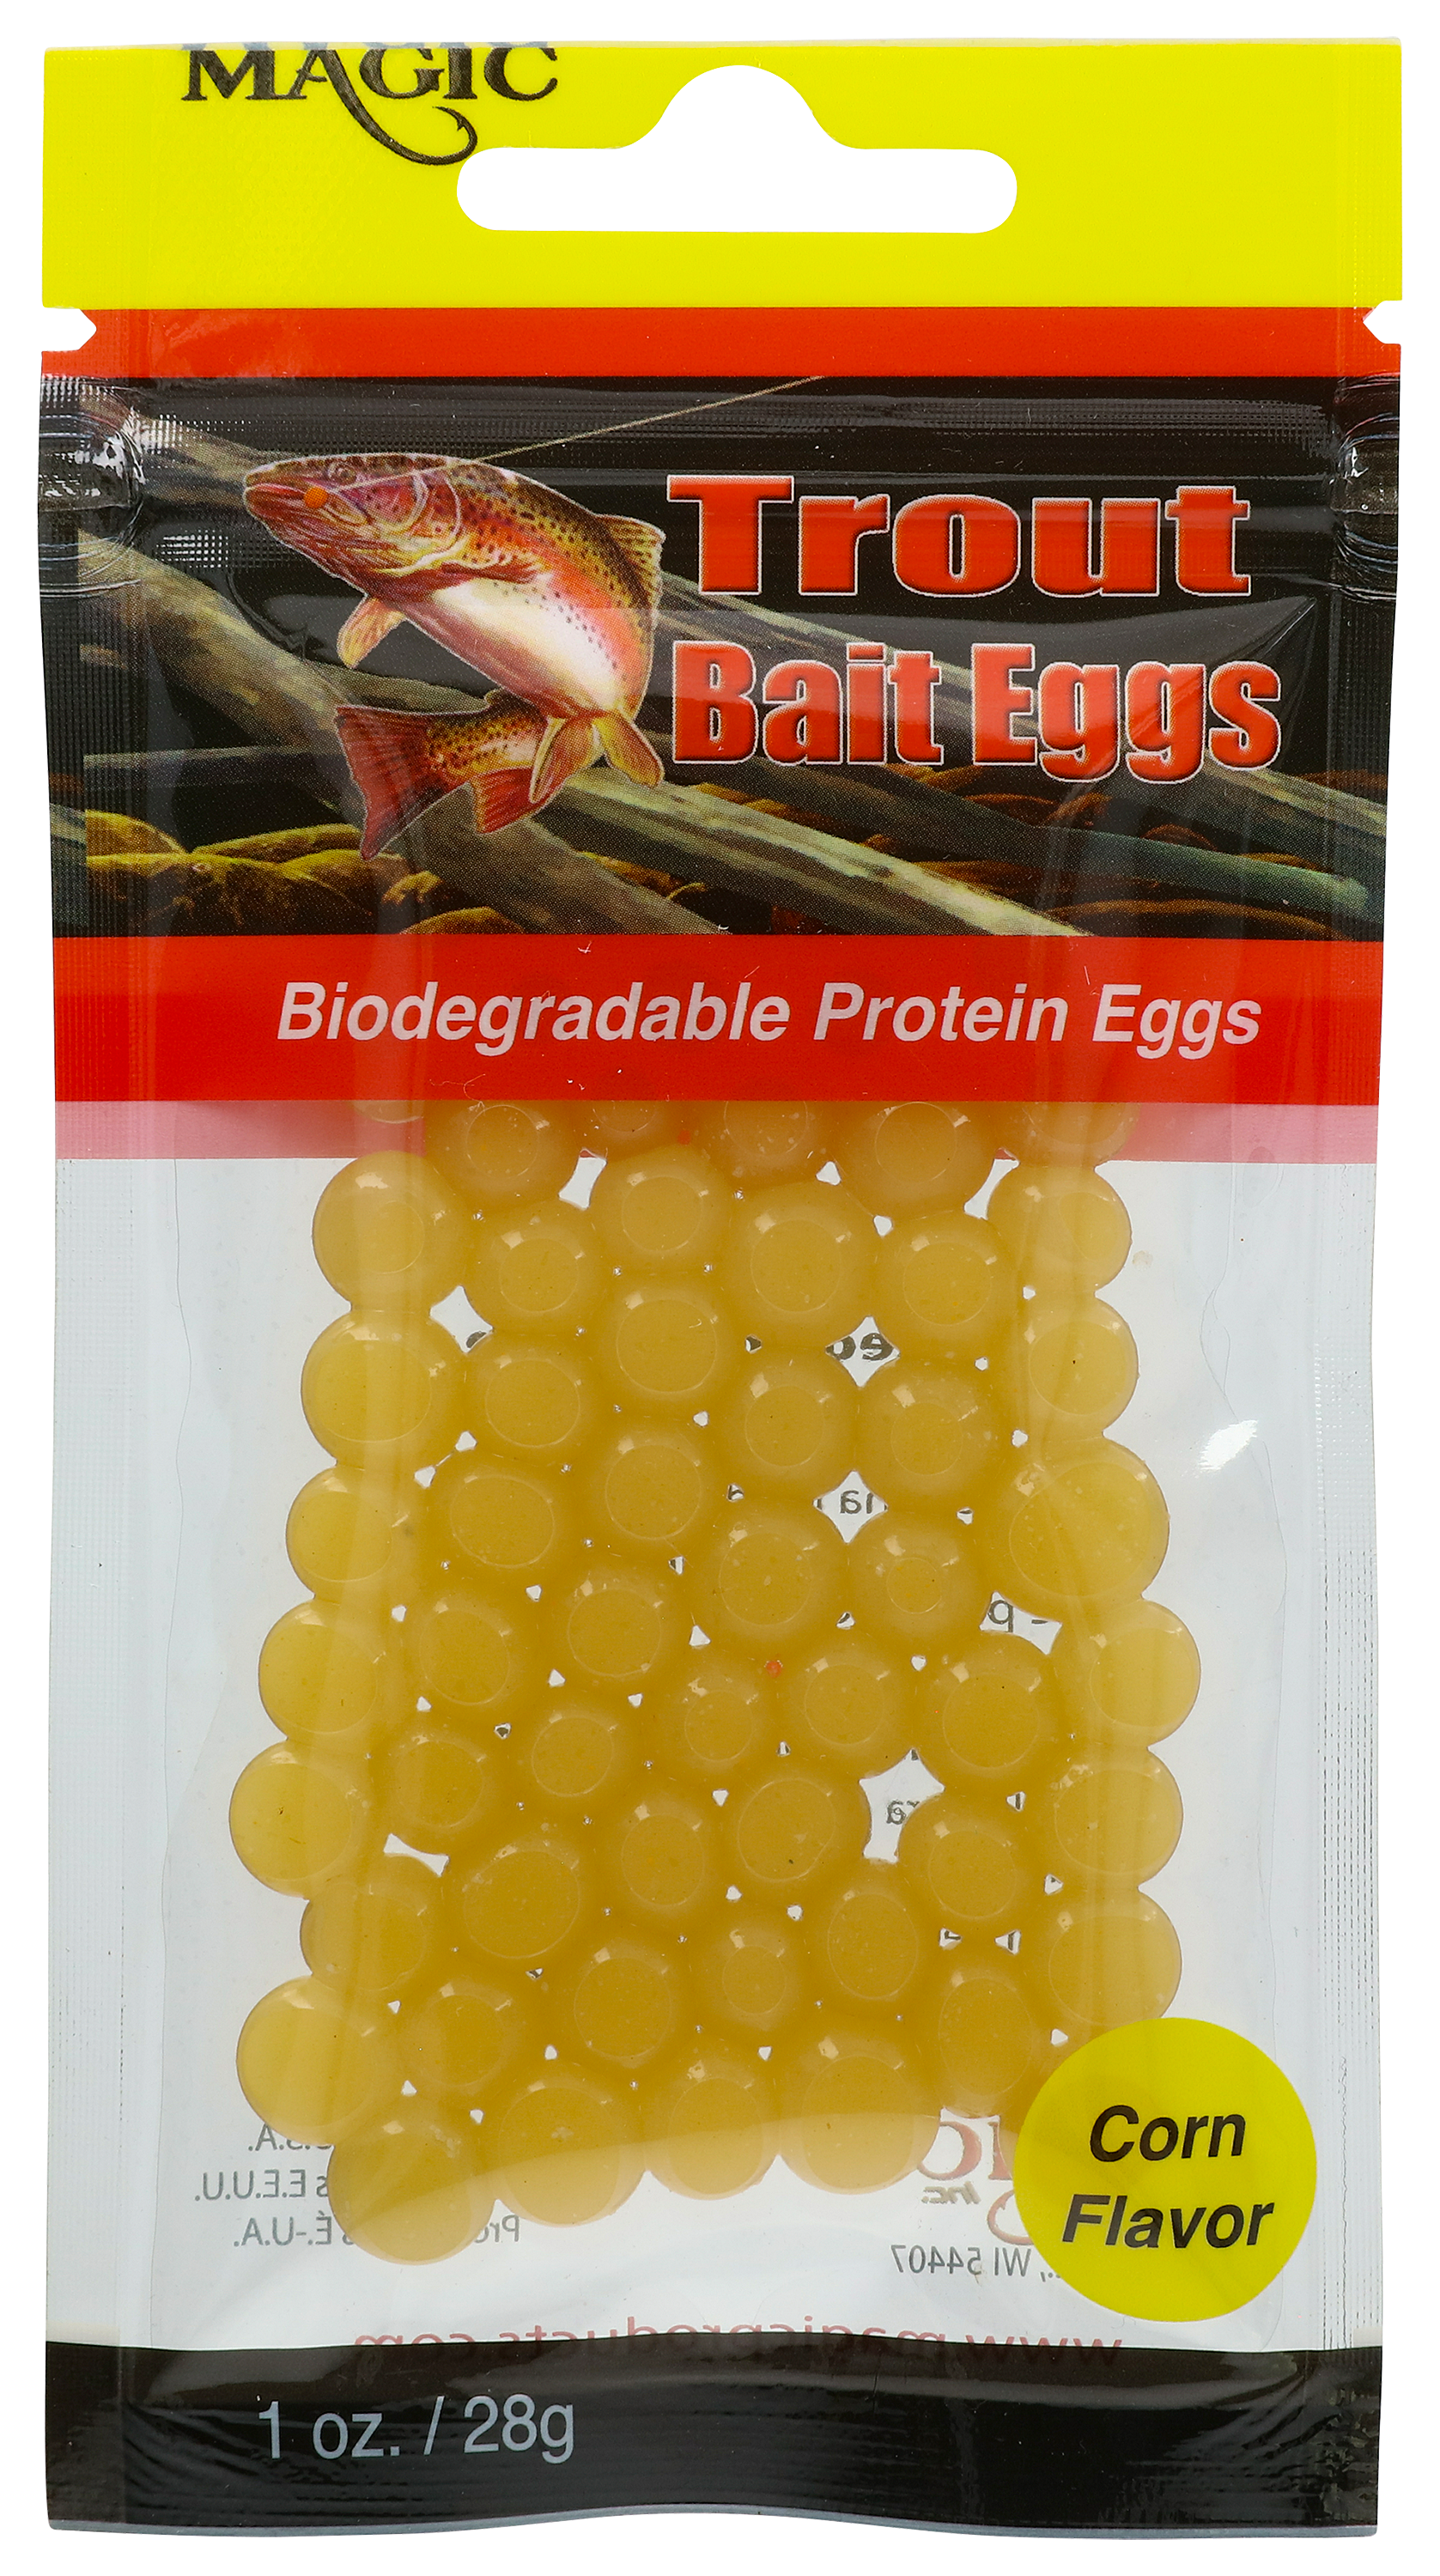 Magic Products Trout Bait Eggs: Light Yellow/Corn